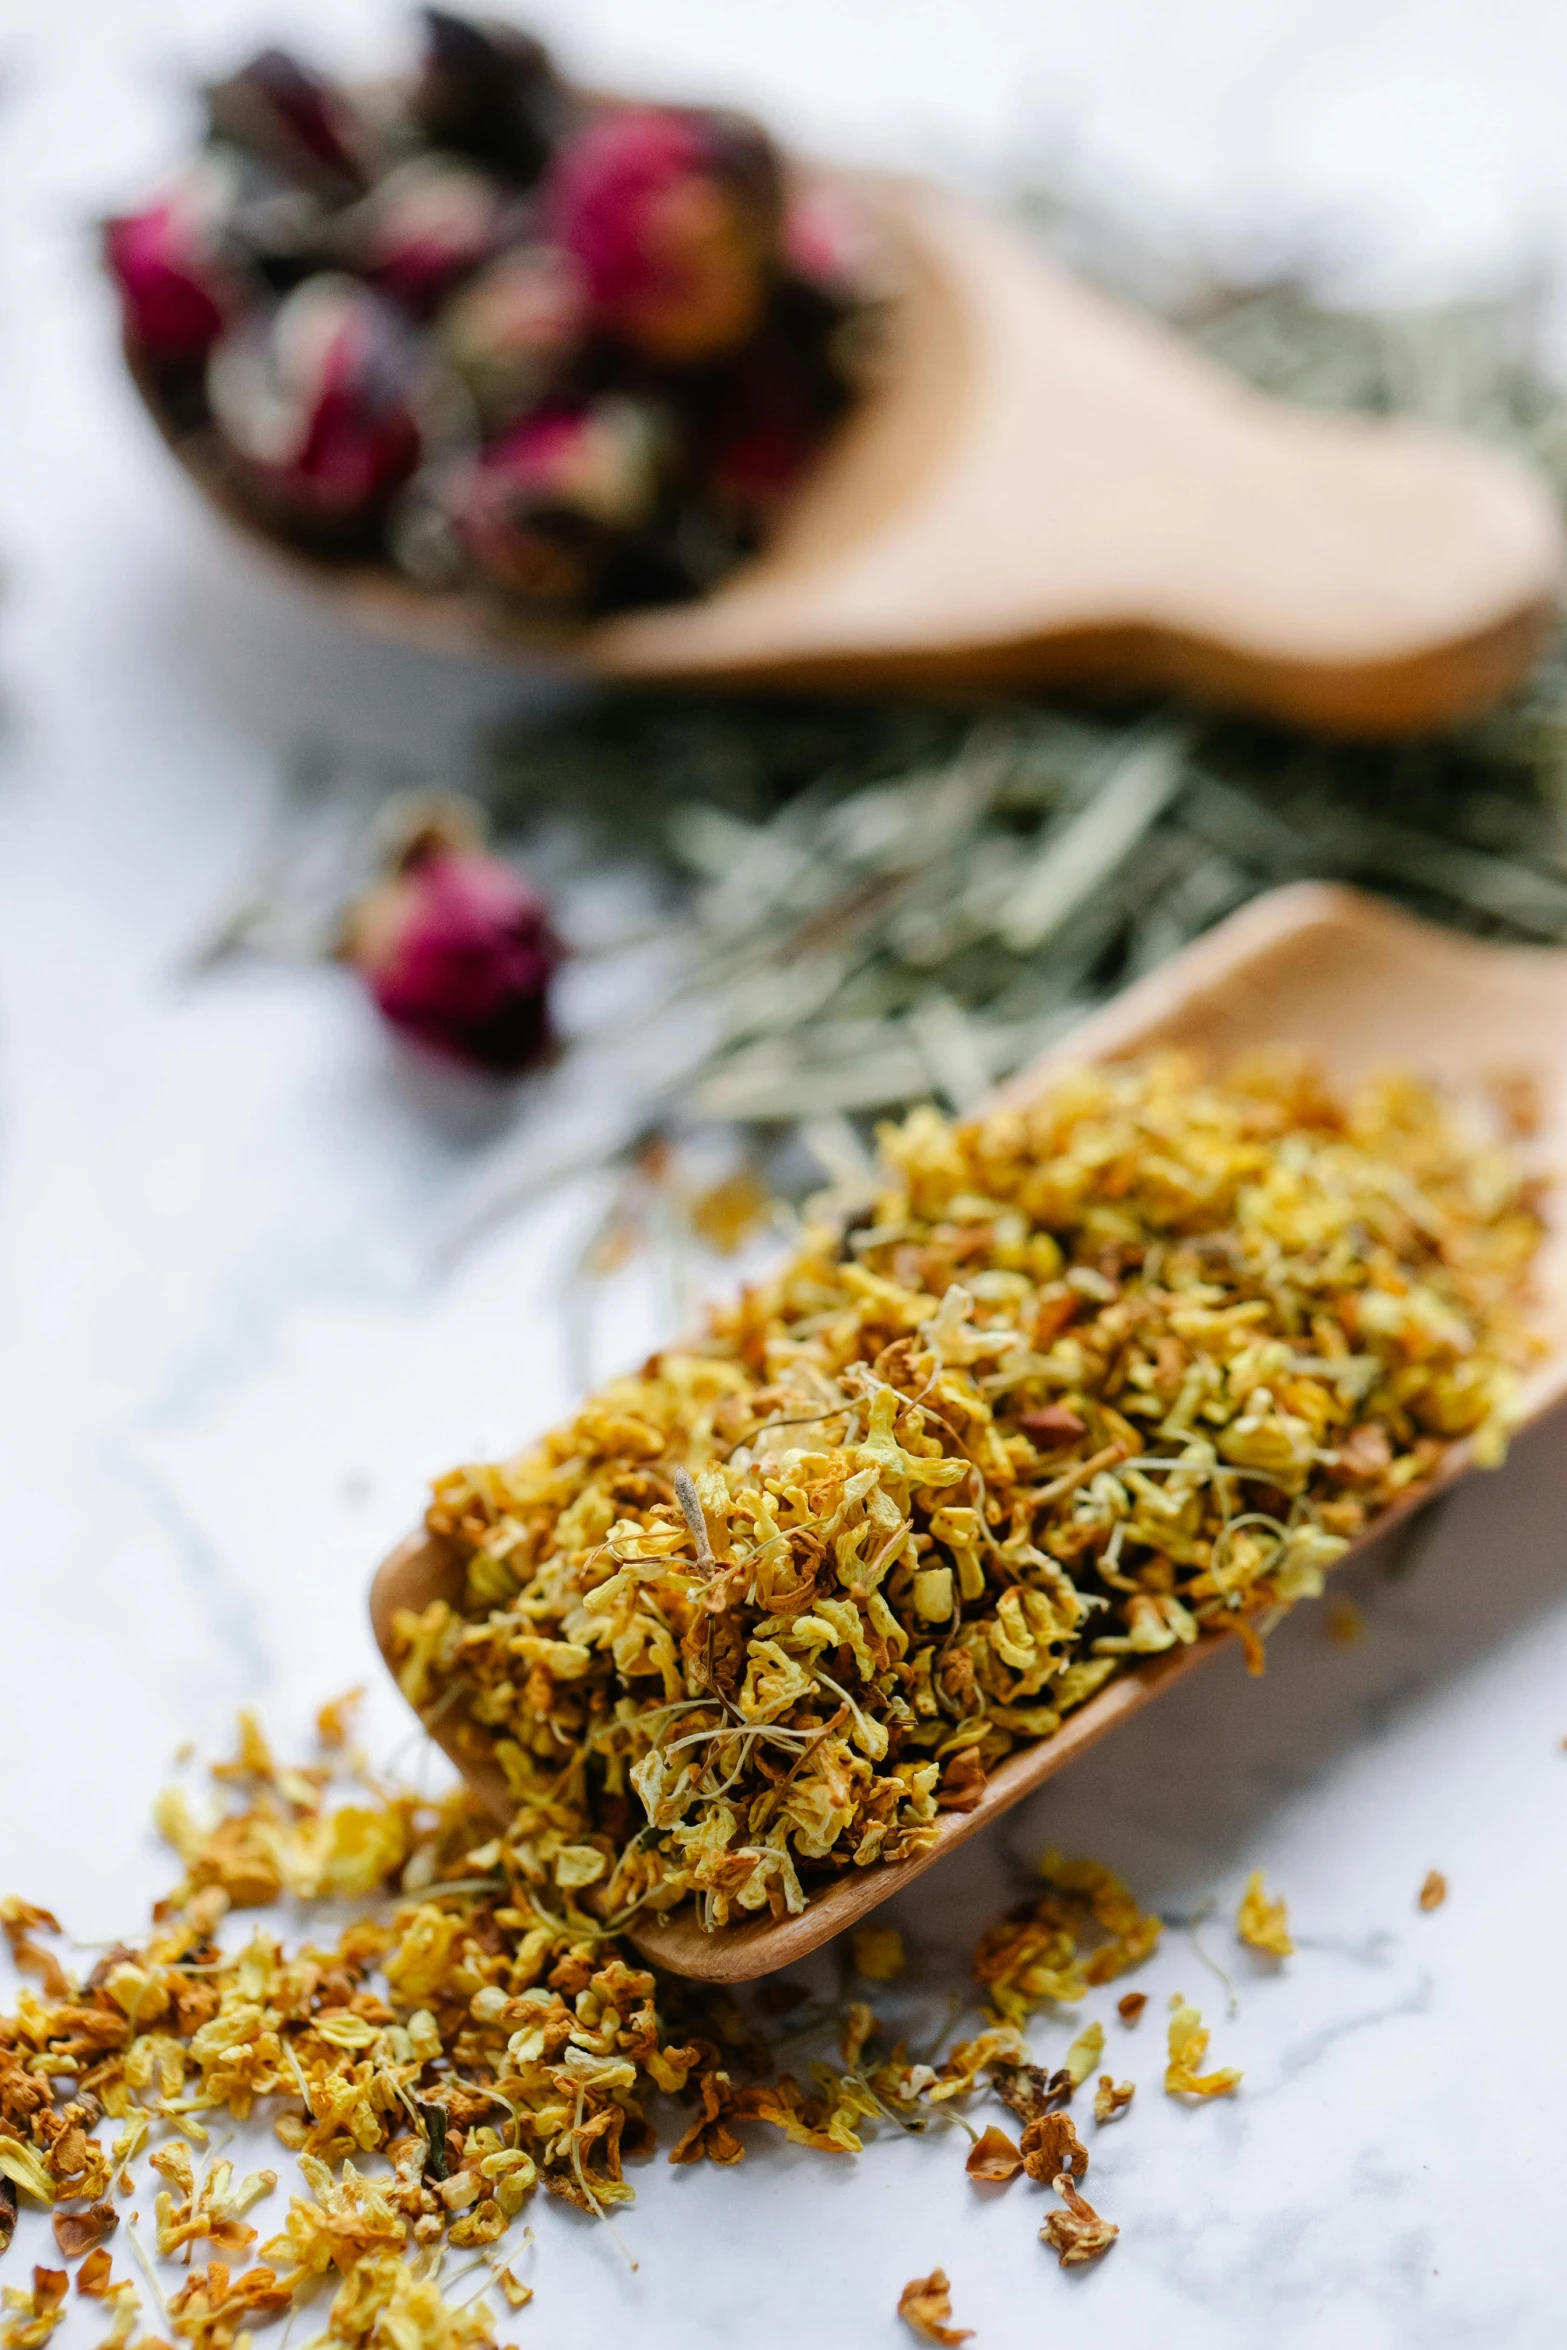 a wooden spoon filled with dried herbs, renaissance, gold flaked flowers, thumbnail, body shot, uncropped